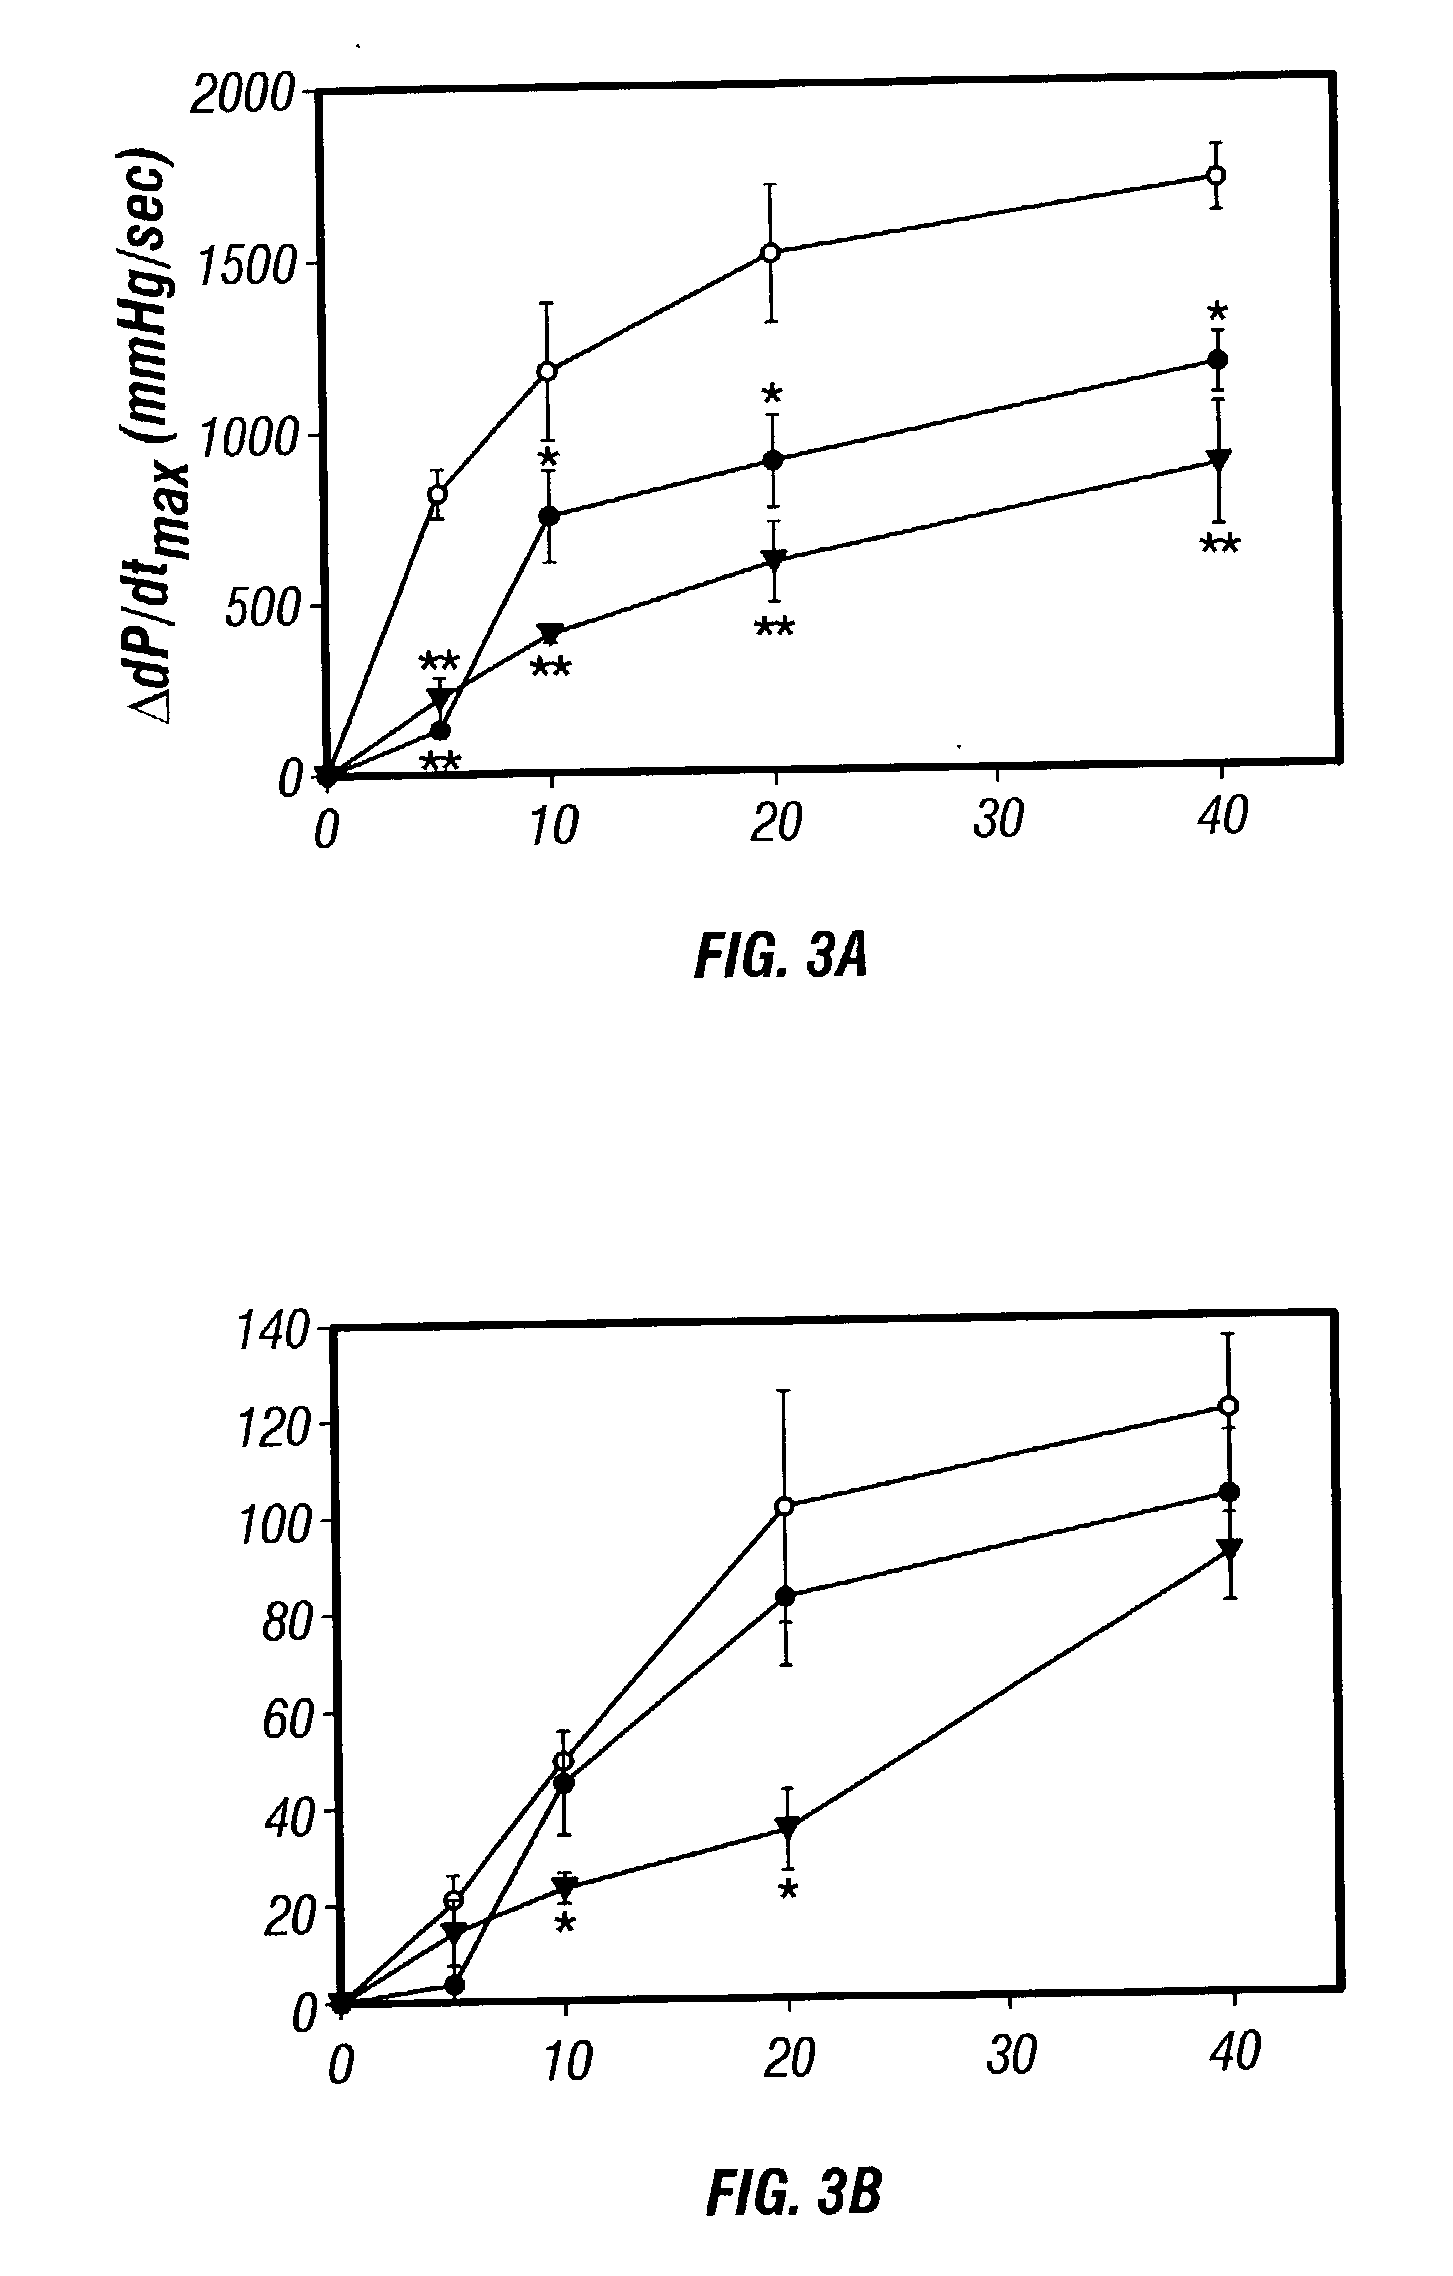 Antisense compositions targeted to beta1-adrenoceptor-specific mRNA and methods of use